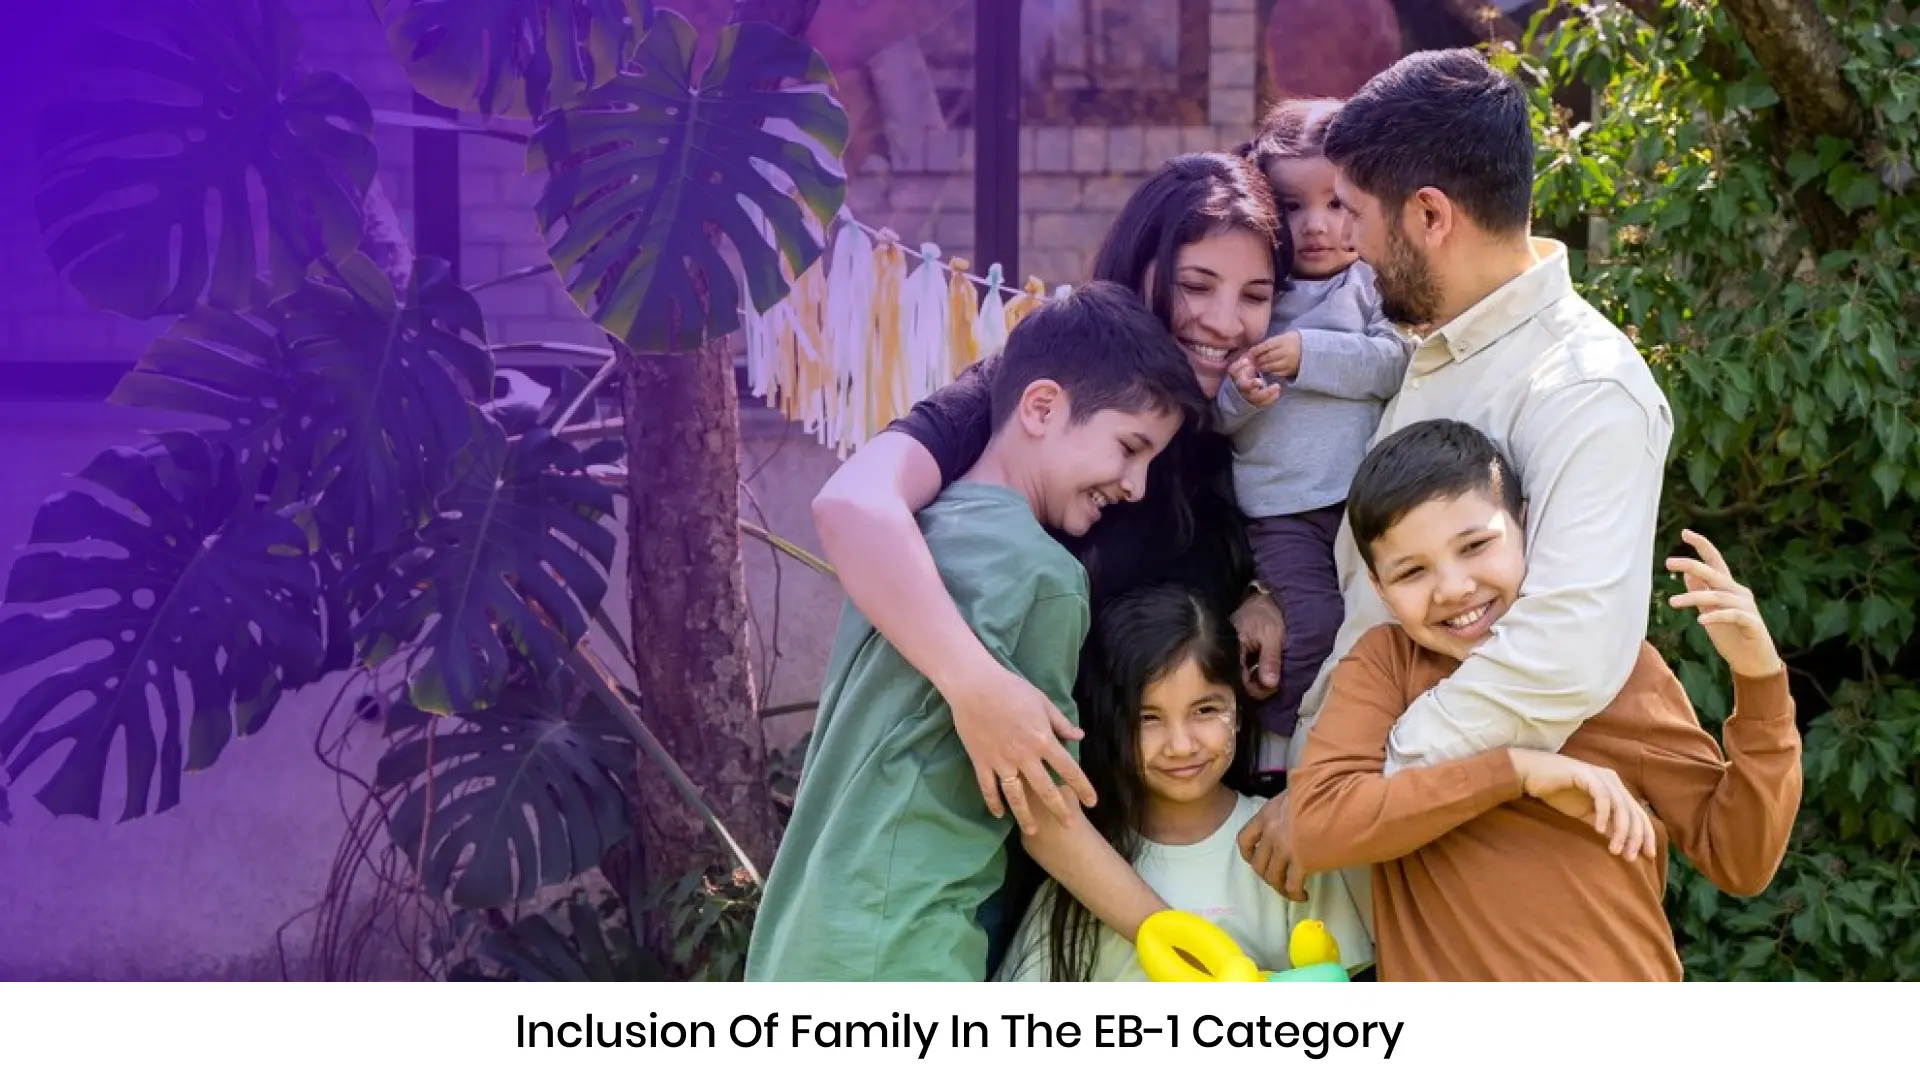 Inclusion of Family in the EB1 Category